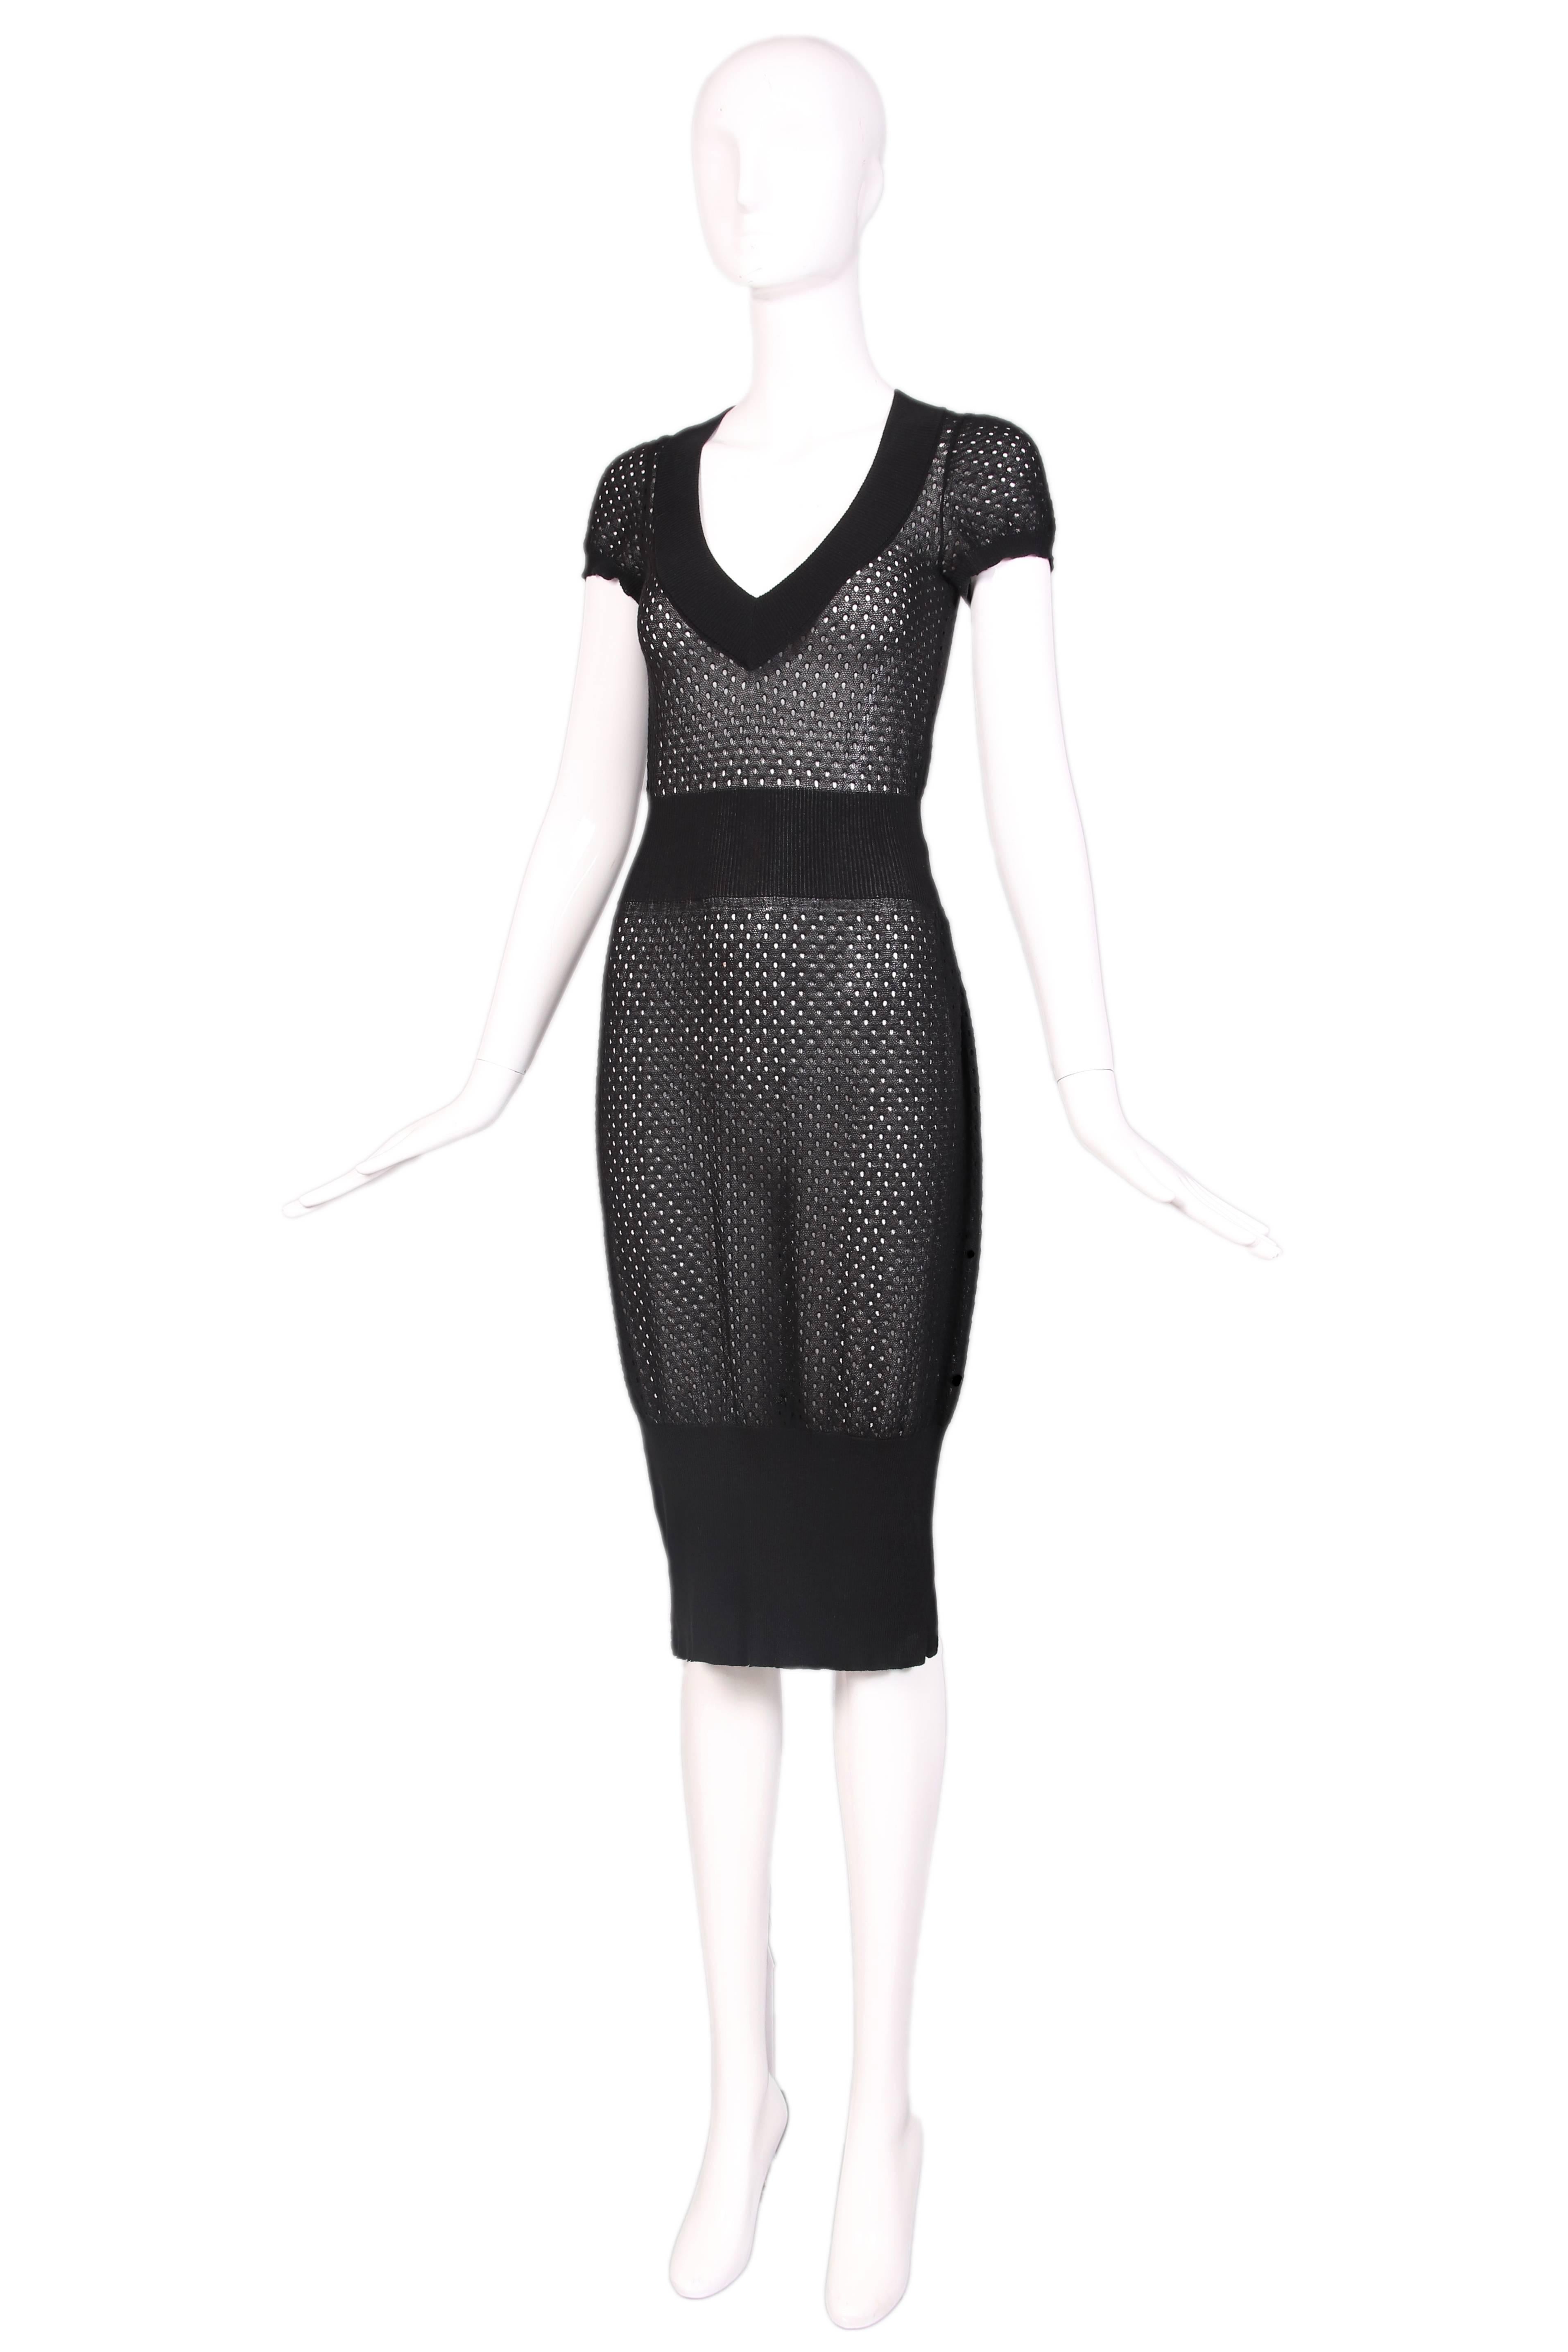 Alaia black stretch open knit net dress with cap sleeves and bubble shape at bottom. In excellent condition. Size US M. 
MEASUREMENTS:
Bust - 32"
Waist - 24-28"
Hip - 42"
Length - 44"
